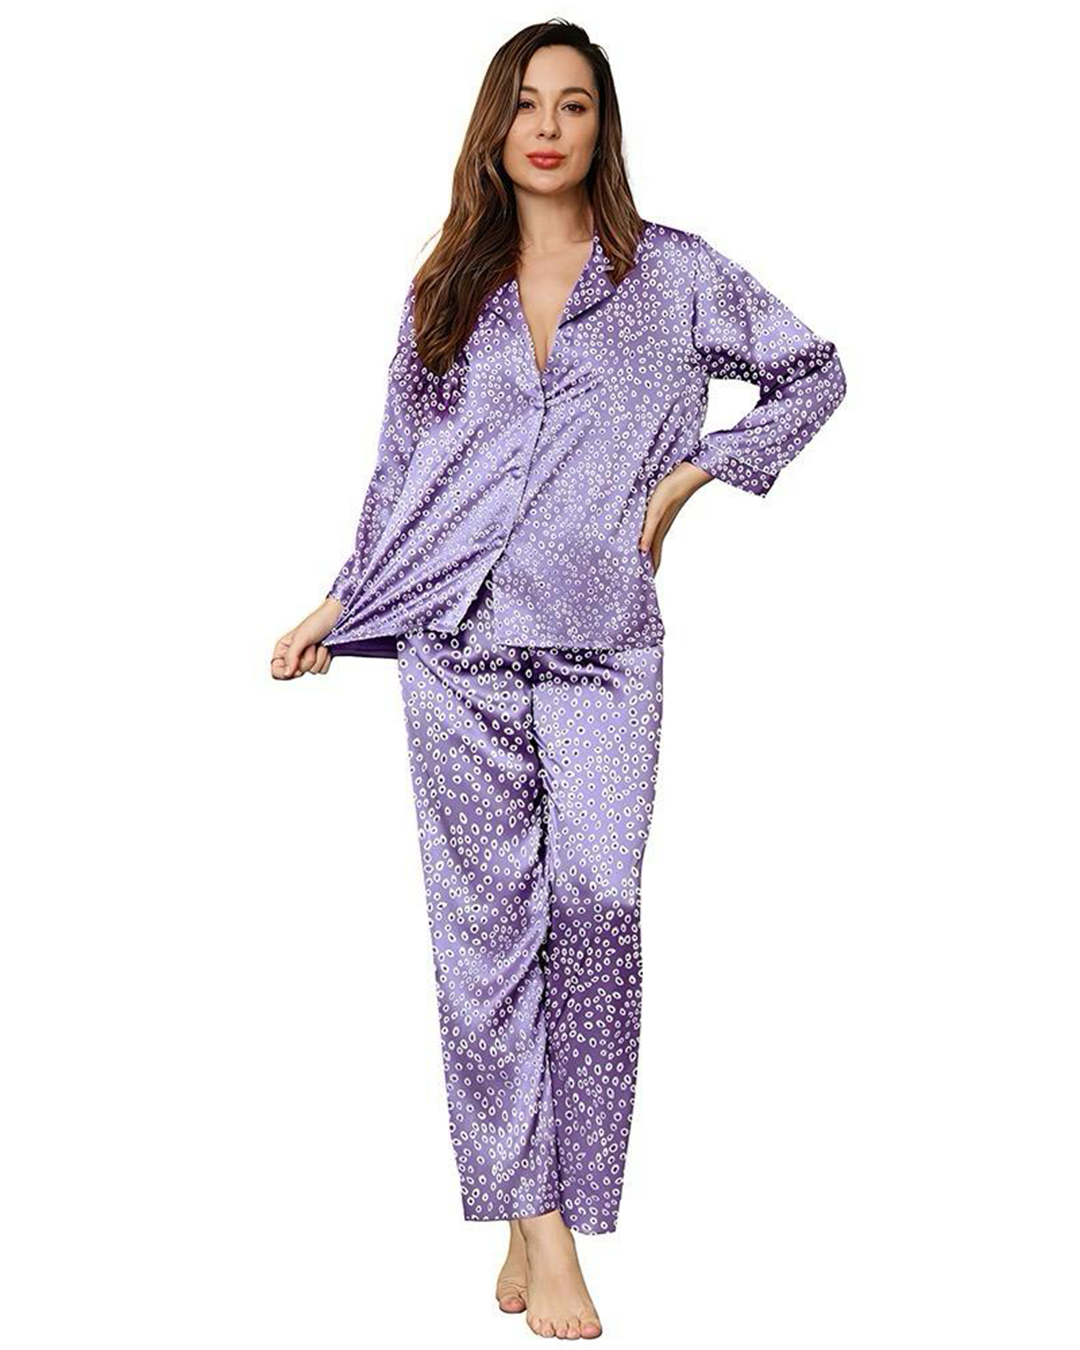 Women's pajamas with dotted satin buttons – 2segypt